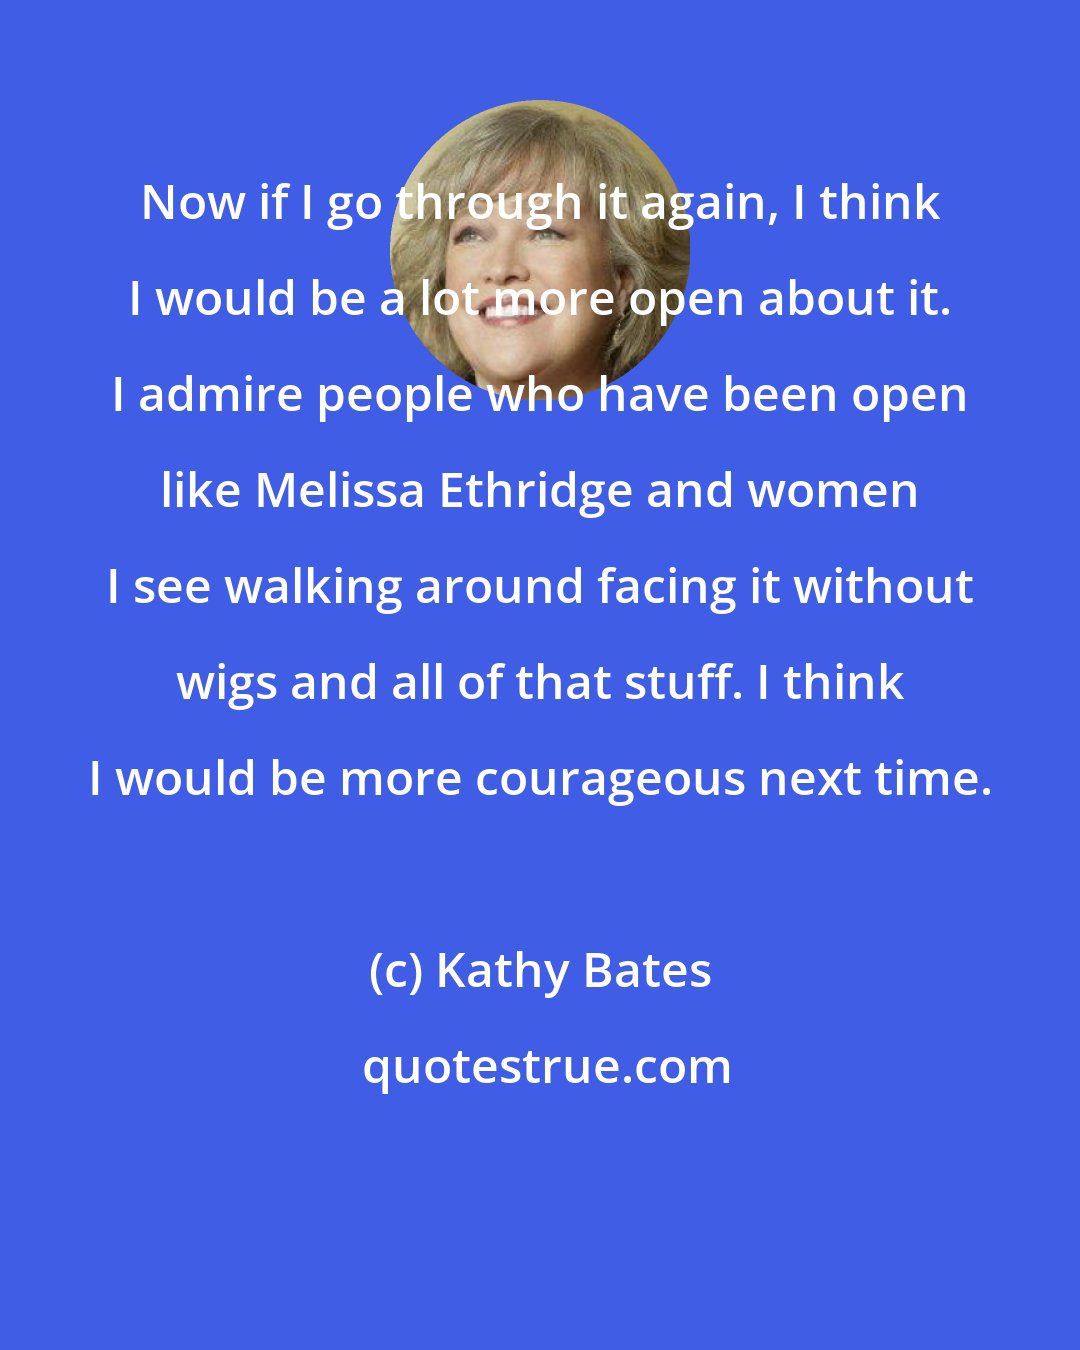 Kathy Bates: Now if I go through it again, I think I would be a lot more open about it. I admire people who have been open like Melissa Ethridge and women I see walking around facing it without wigs and all of that stuff. I think I would be more courageous next time.